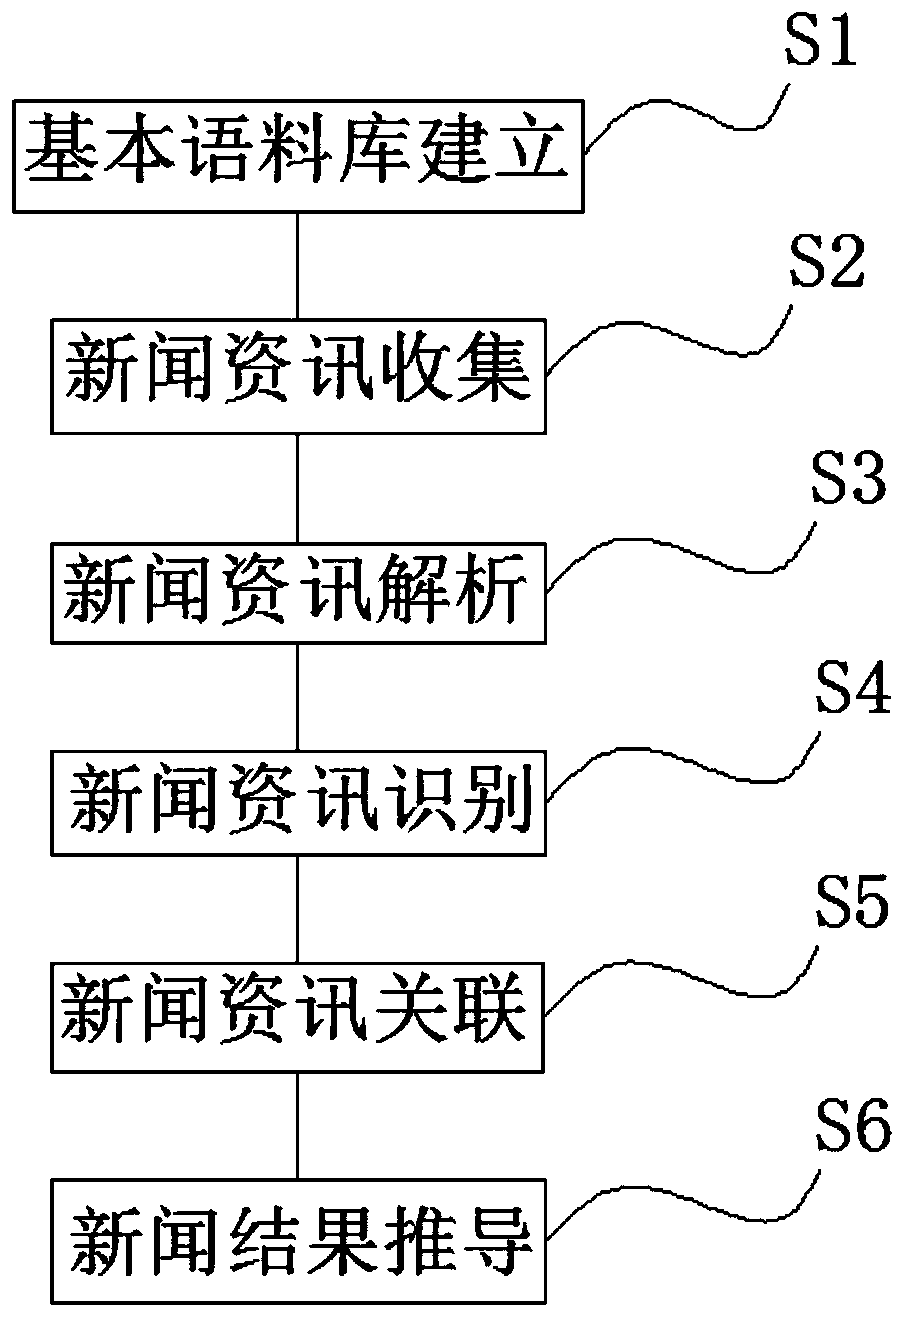 News automatic derivation association mechanism method and system